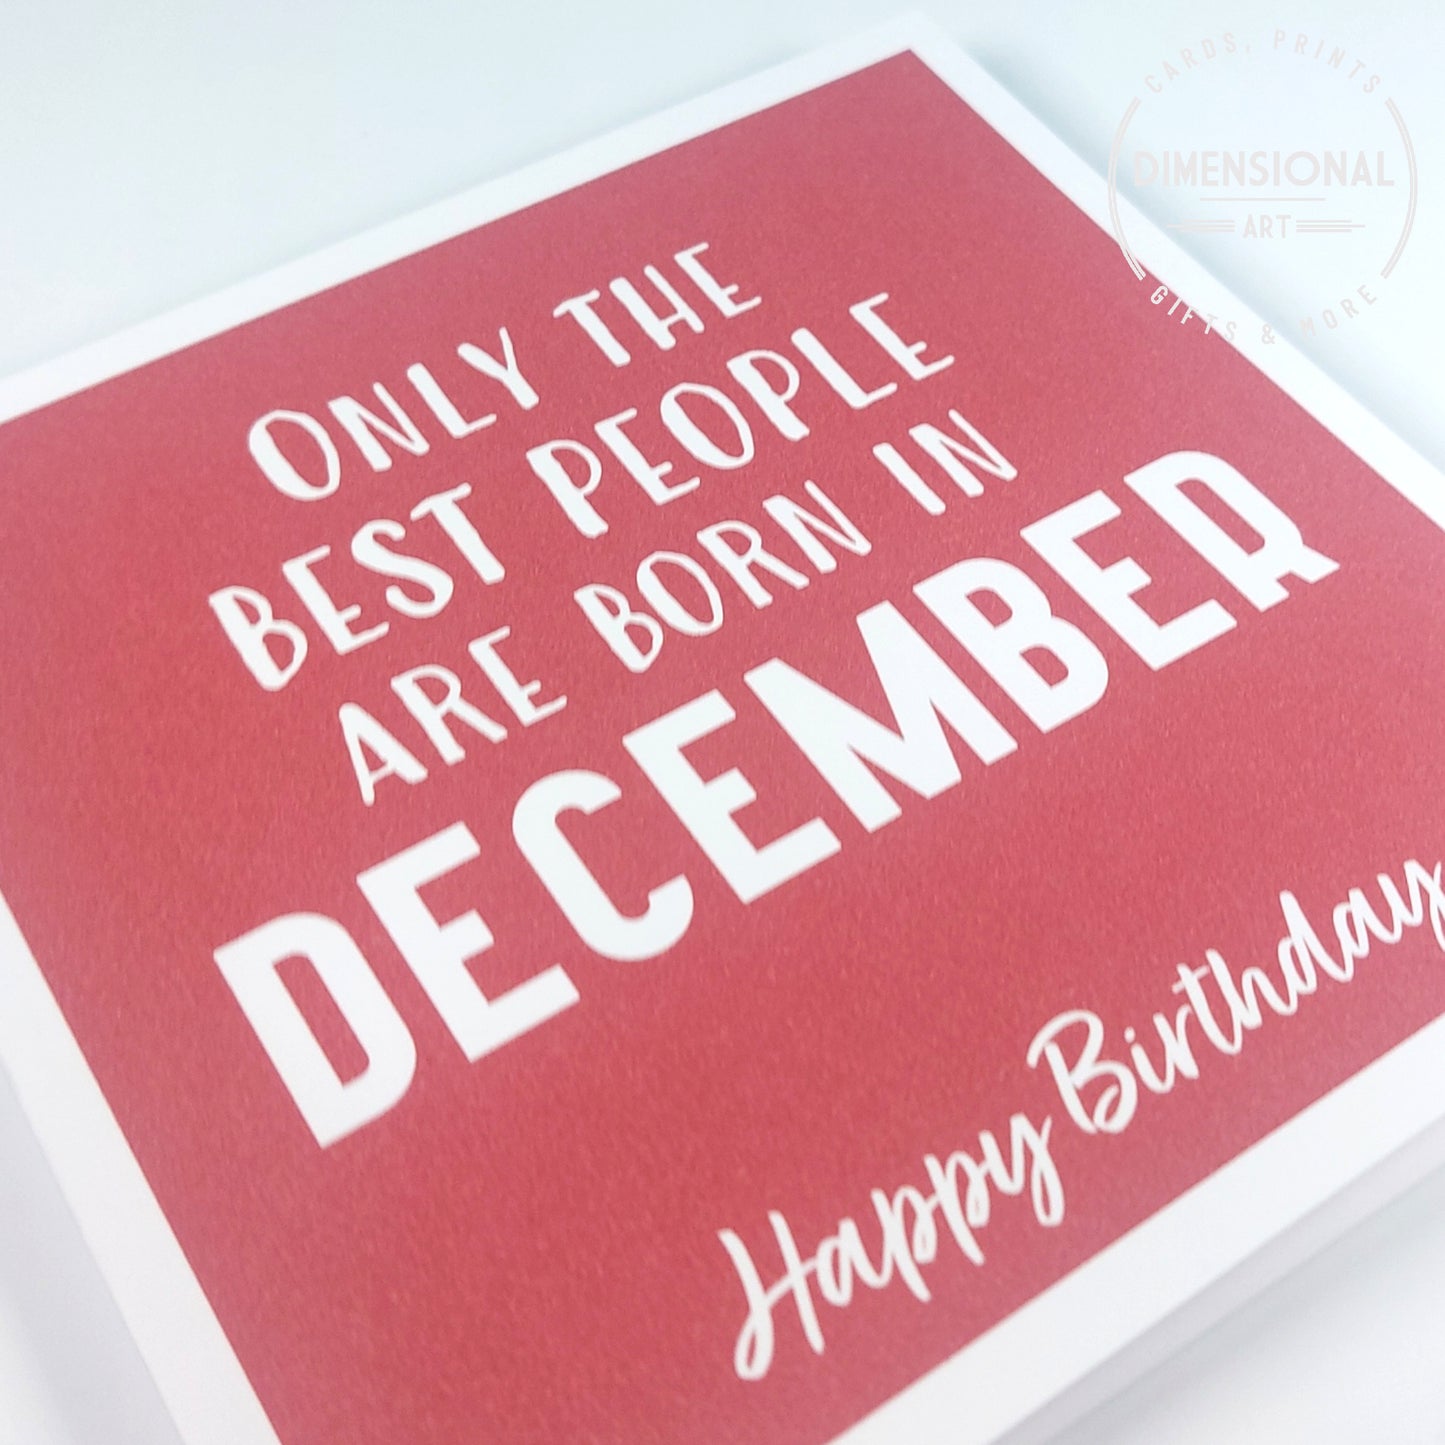 Best people are born in DECEMBER - Birthday Card